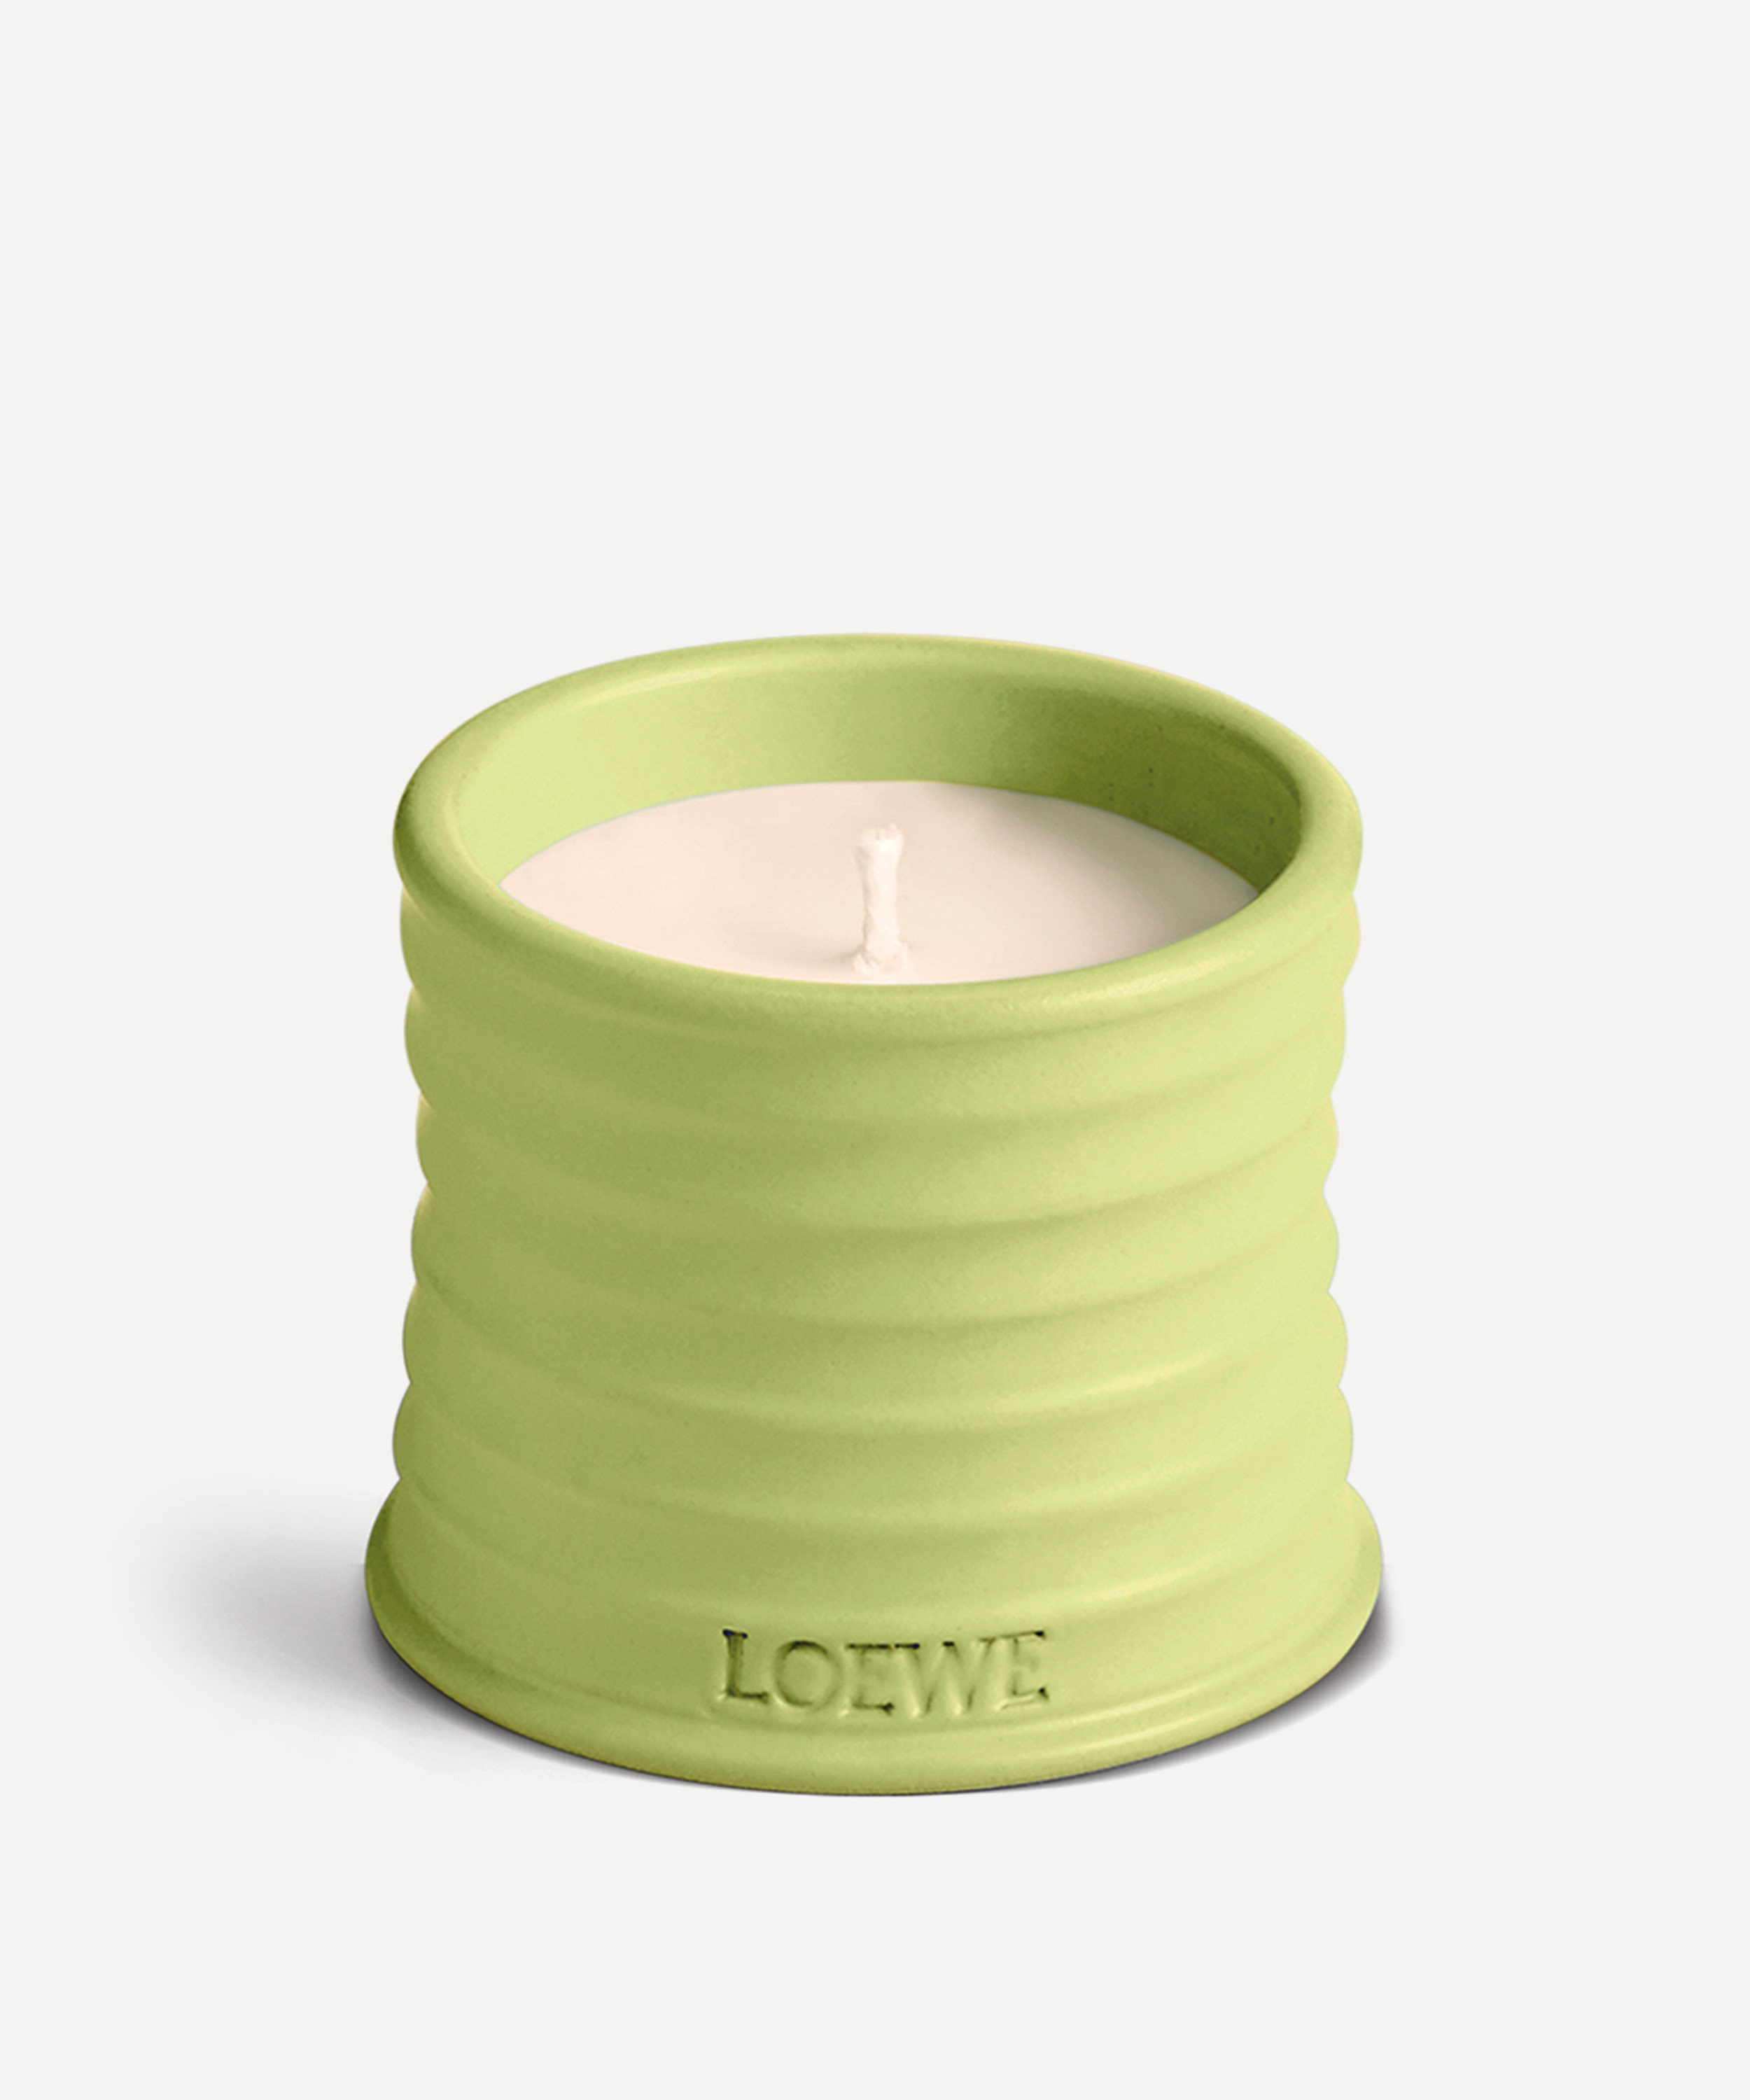 Loewe - Small Cucumber Candle 170g image number 5